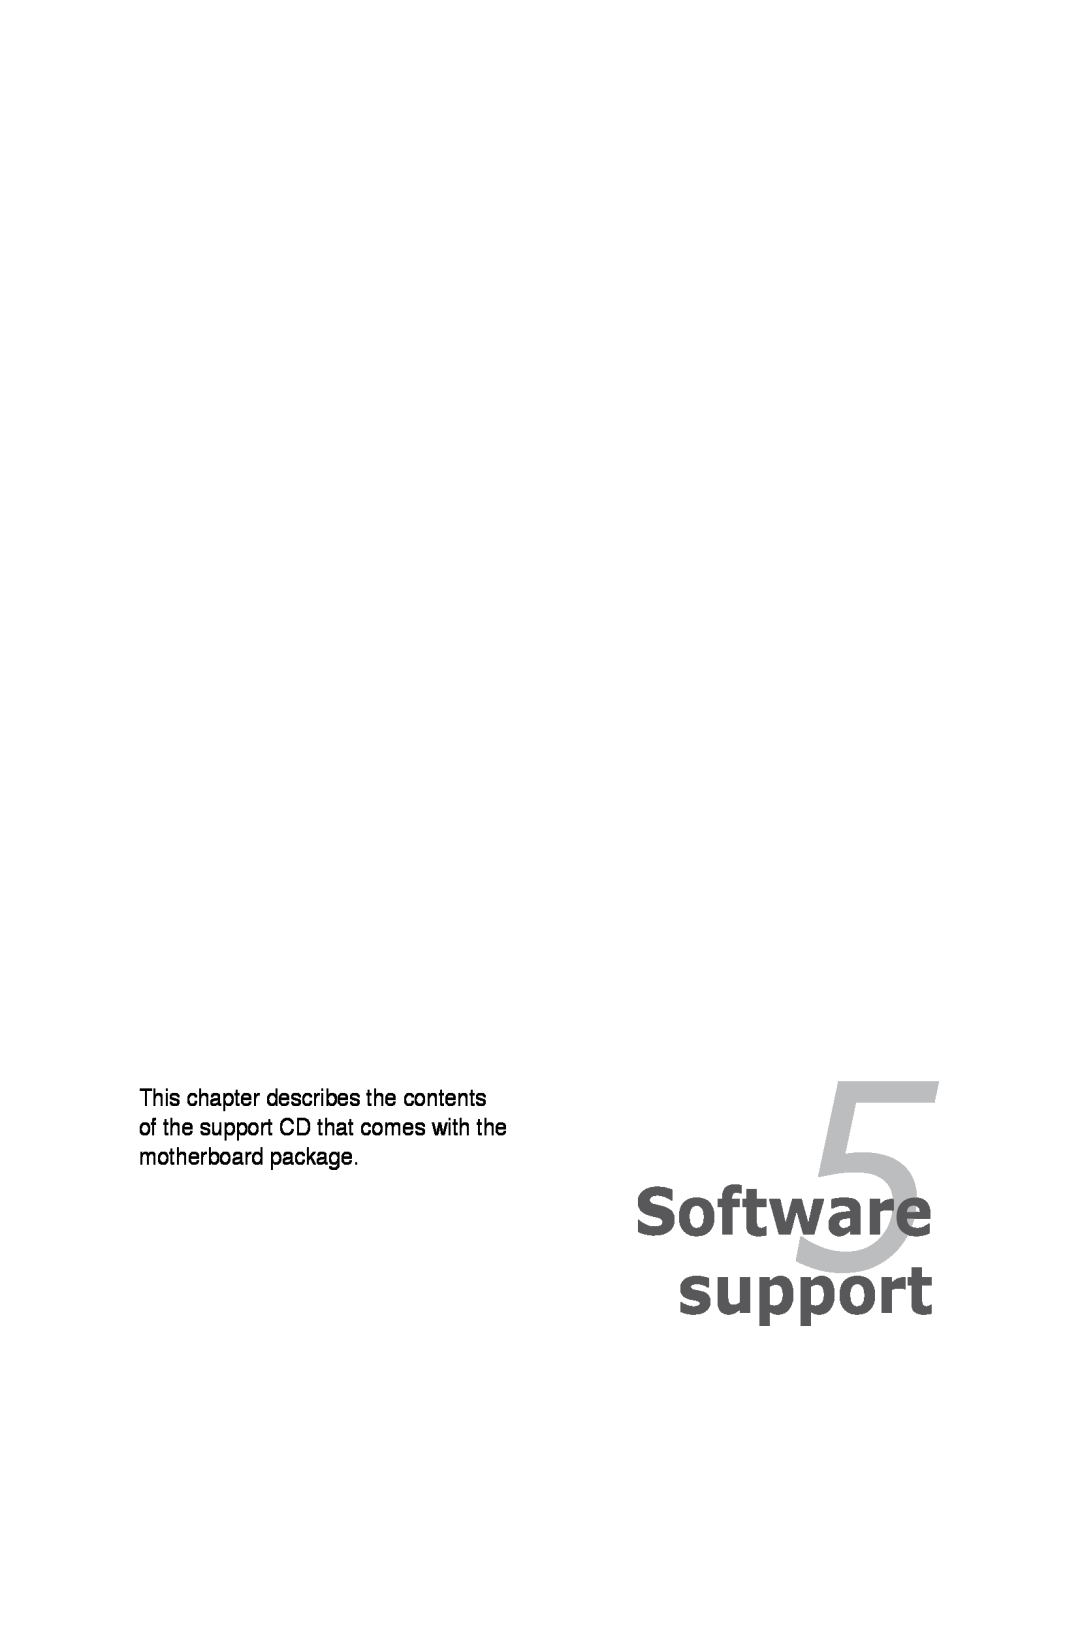 Asus Z7S WS manual Chapter, support, Software 